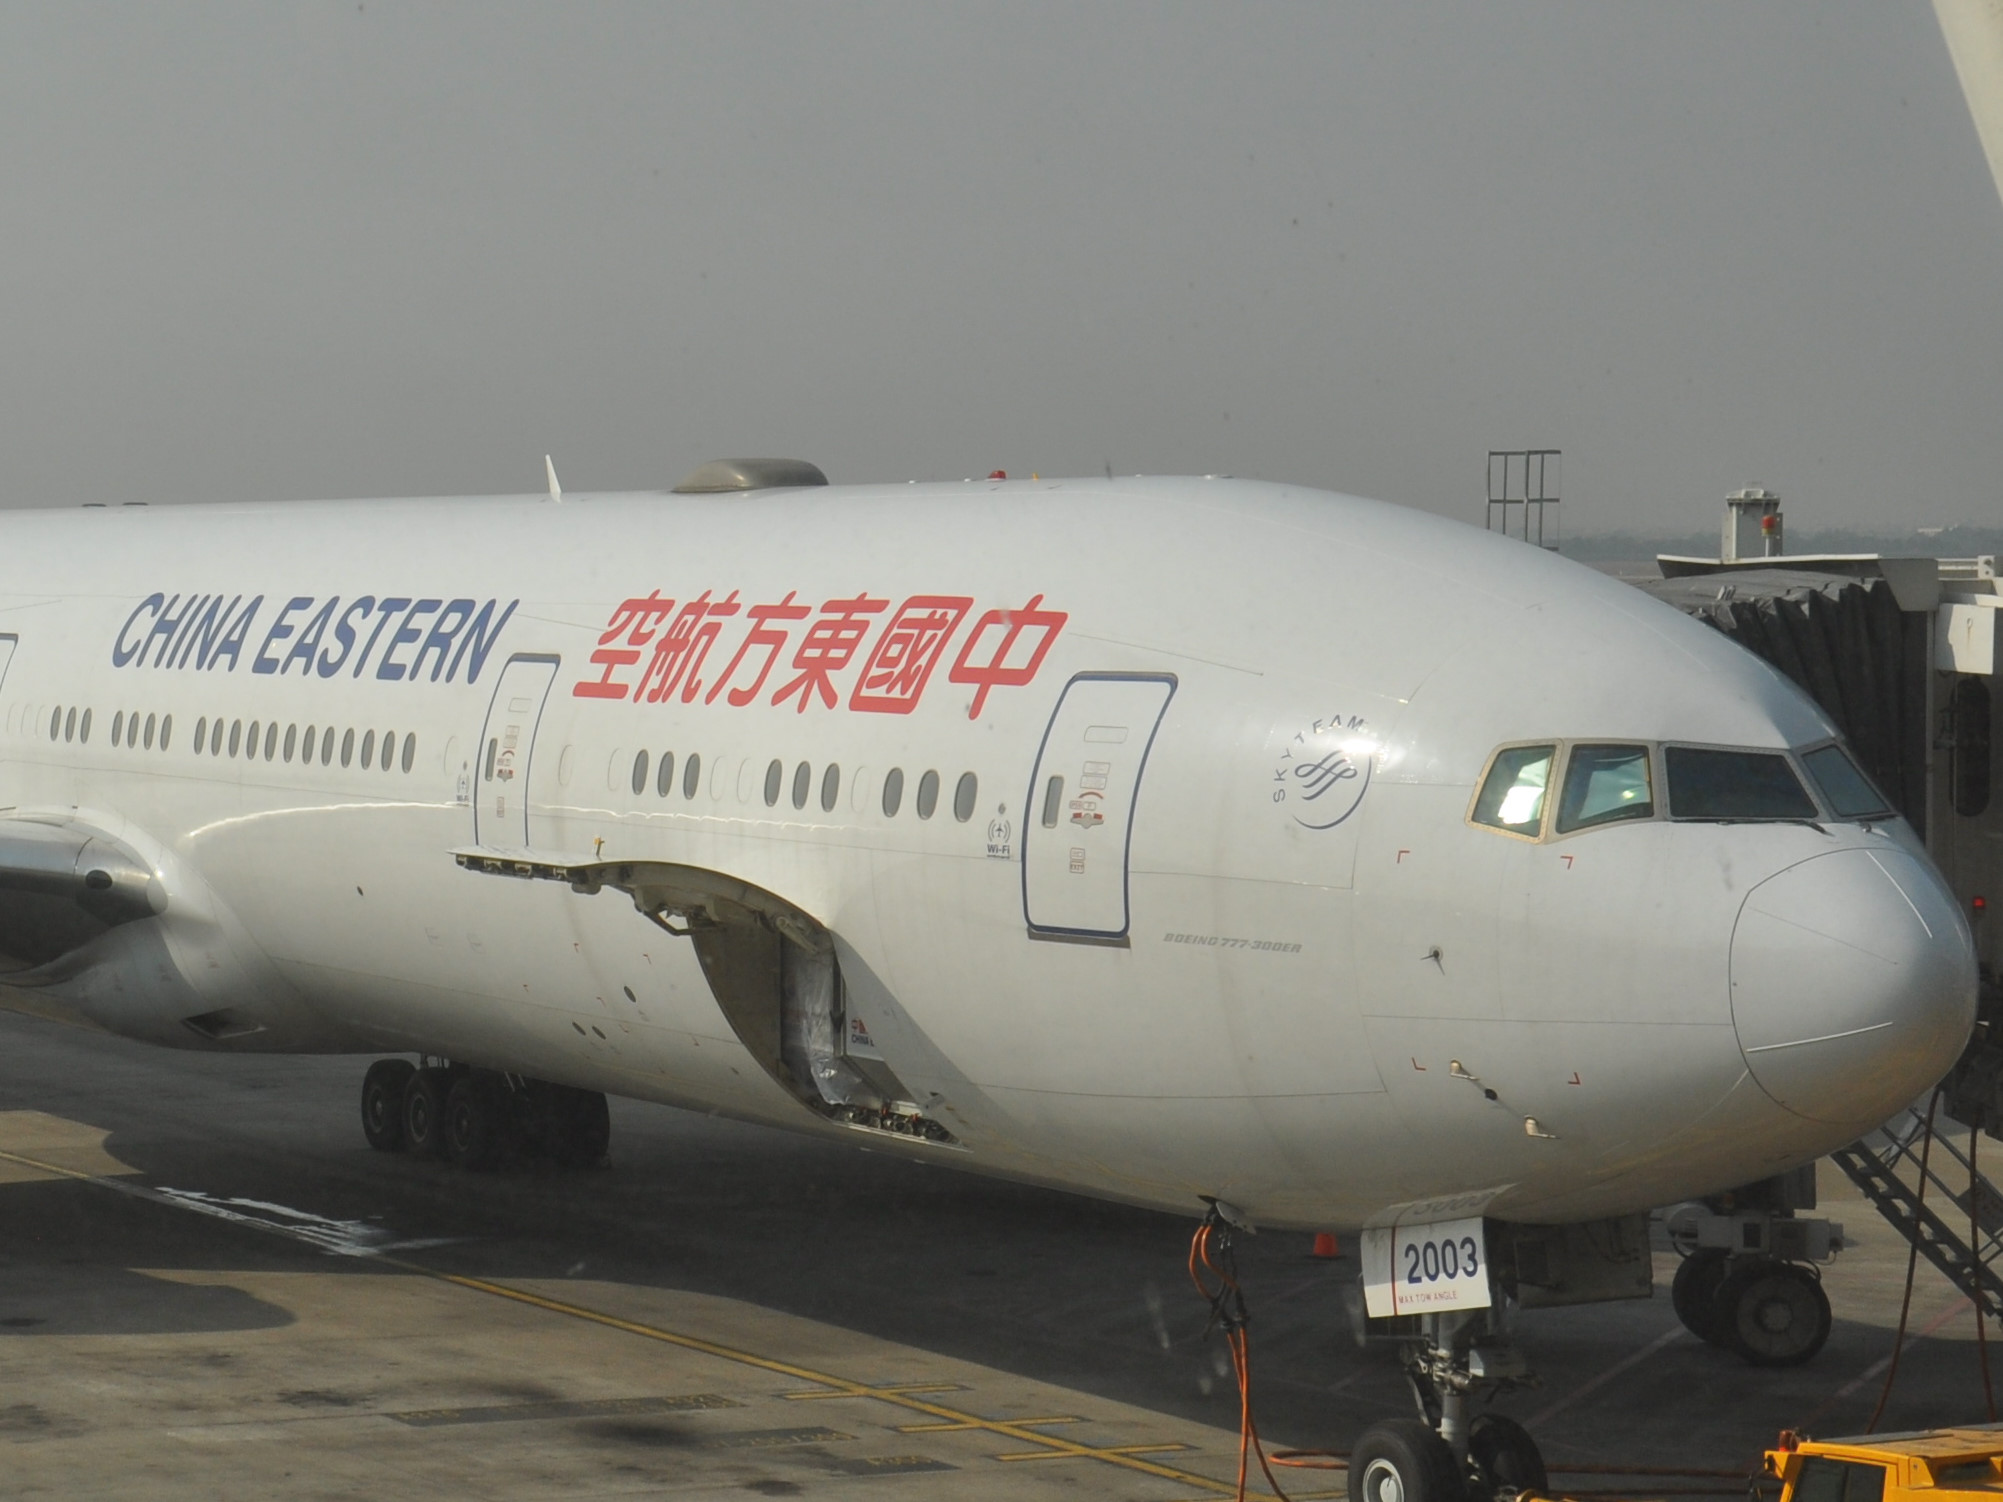 My China Eastern Boeing 777 waiting to take me back to London Heathrow from Shanghai's Pudong Airport.